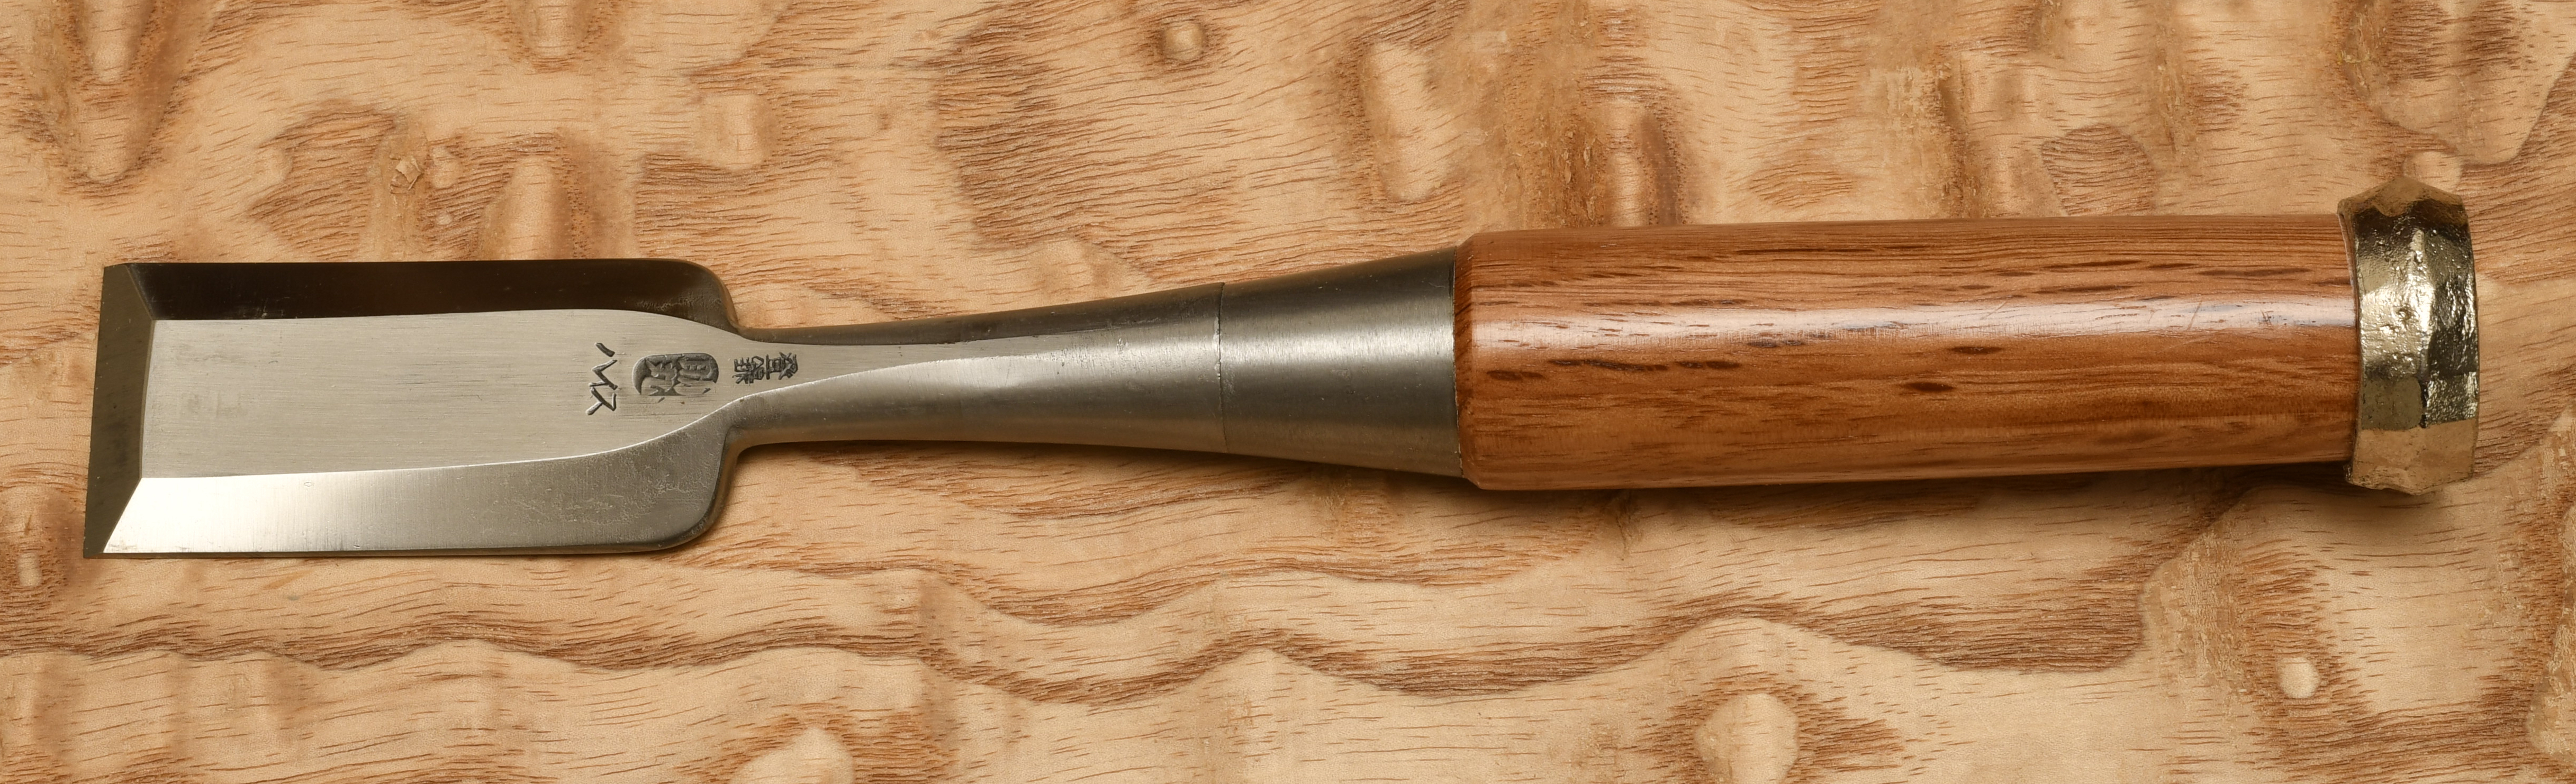 Unbreakable japanese wood chisels For Chiseling Effectiveness 